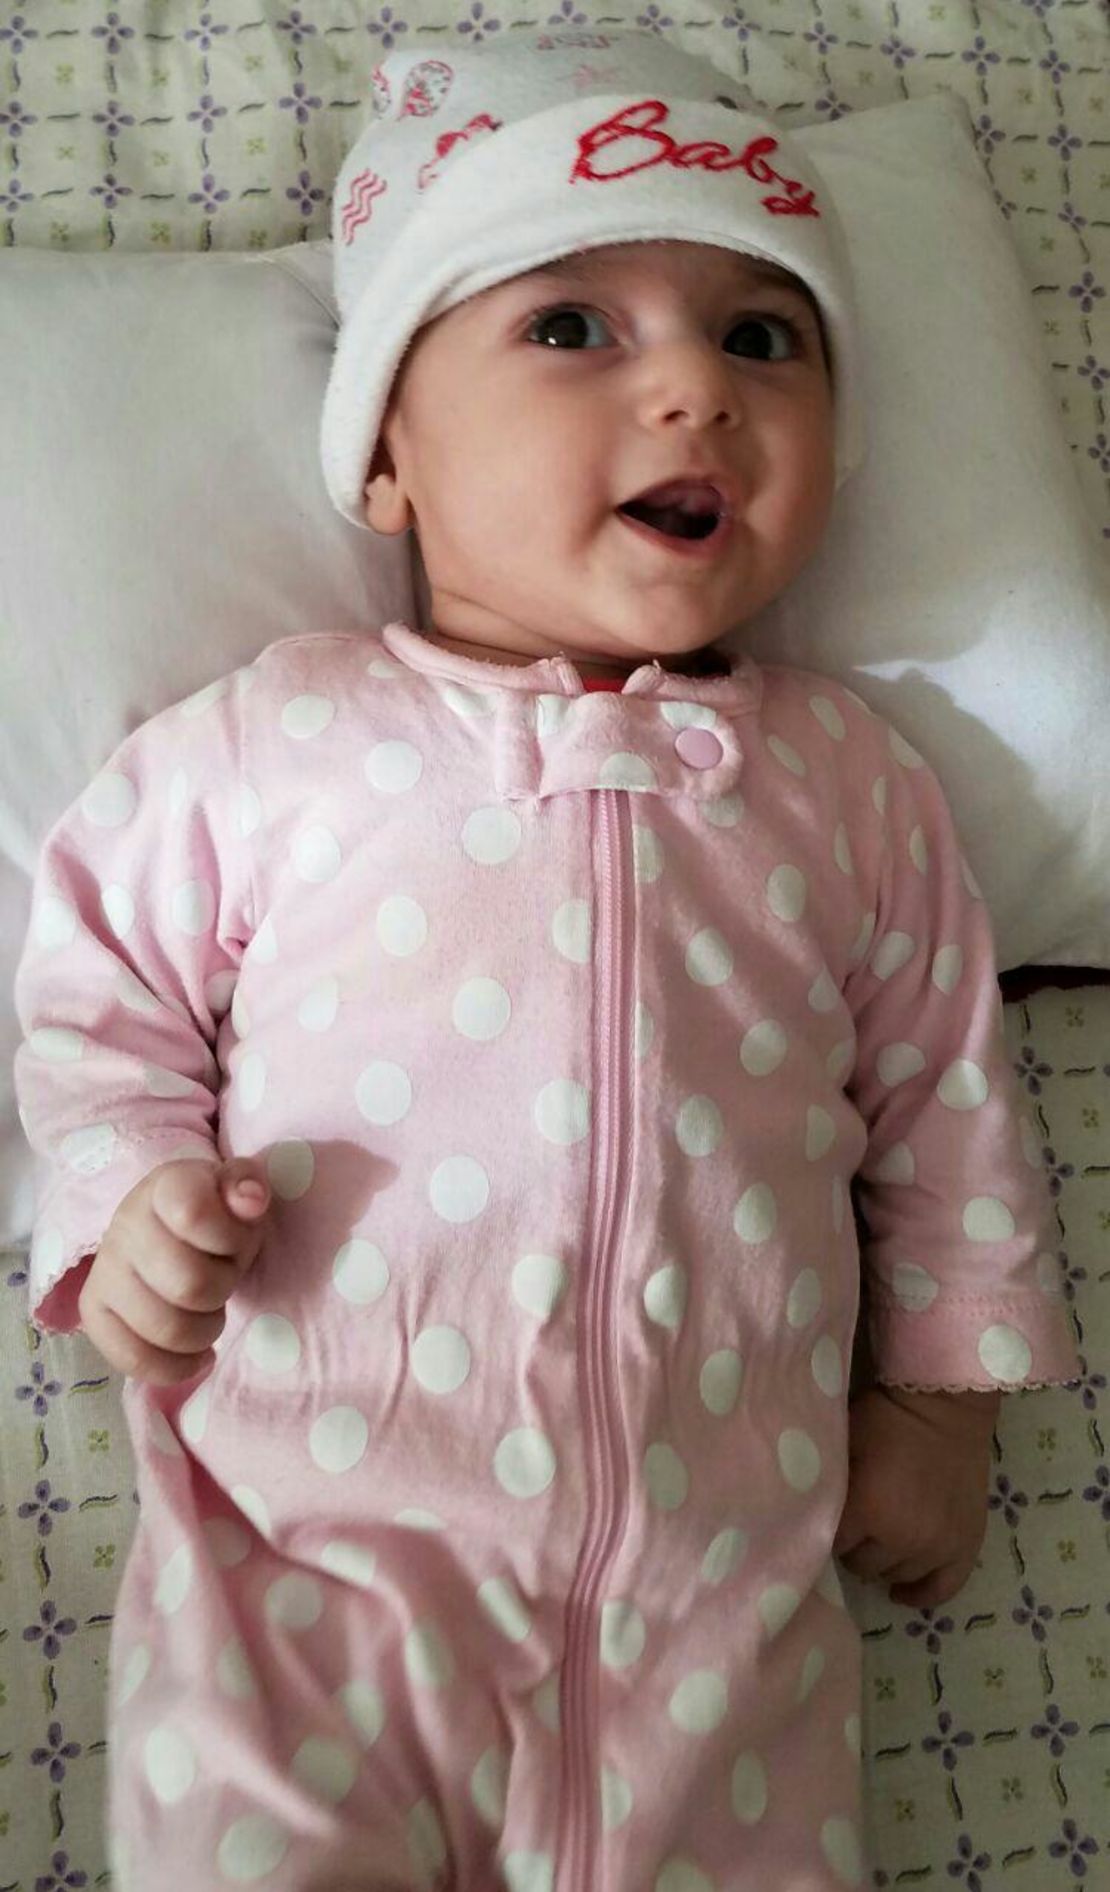 Fatemeh Reshad, a 4-month-old girl from Iran, needs urgent heart surgery.